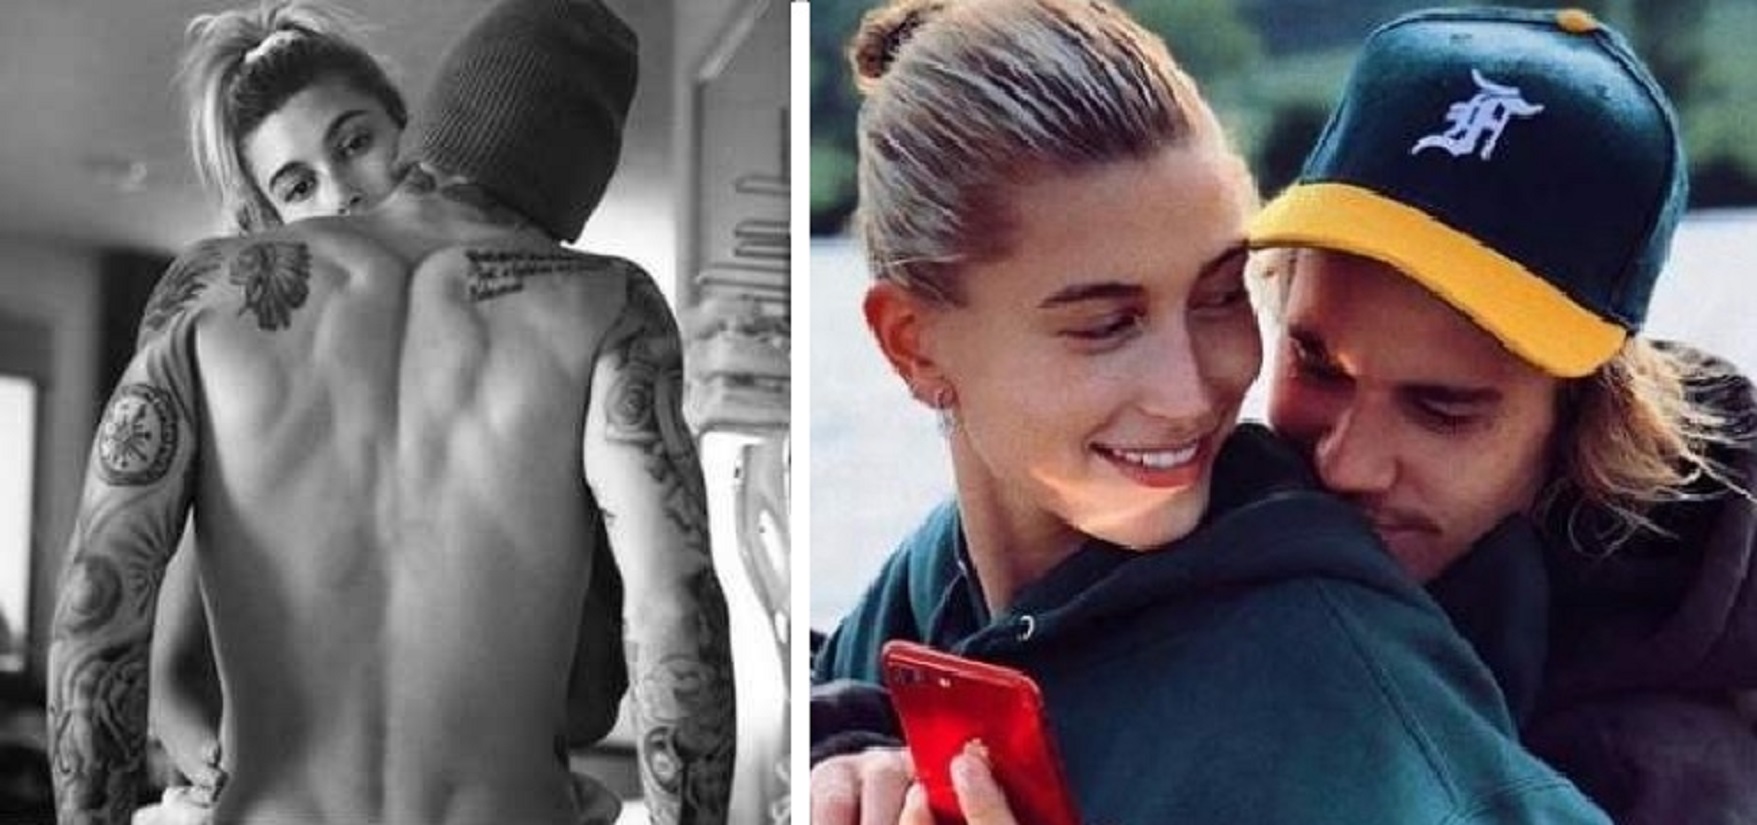 Justin Bieber Says Wife Hailey Baldwin is His Gift This Year!